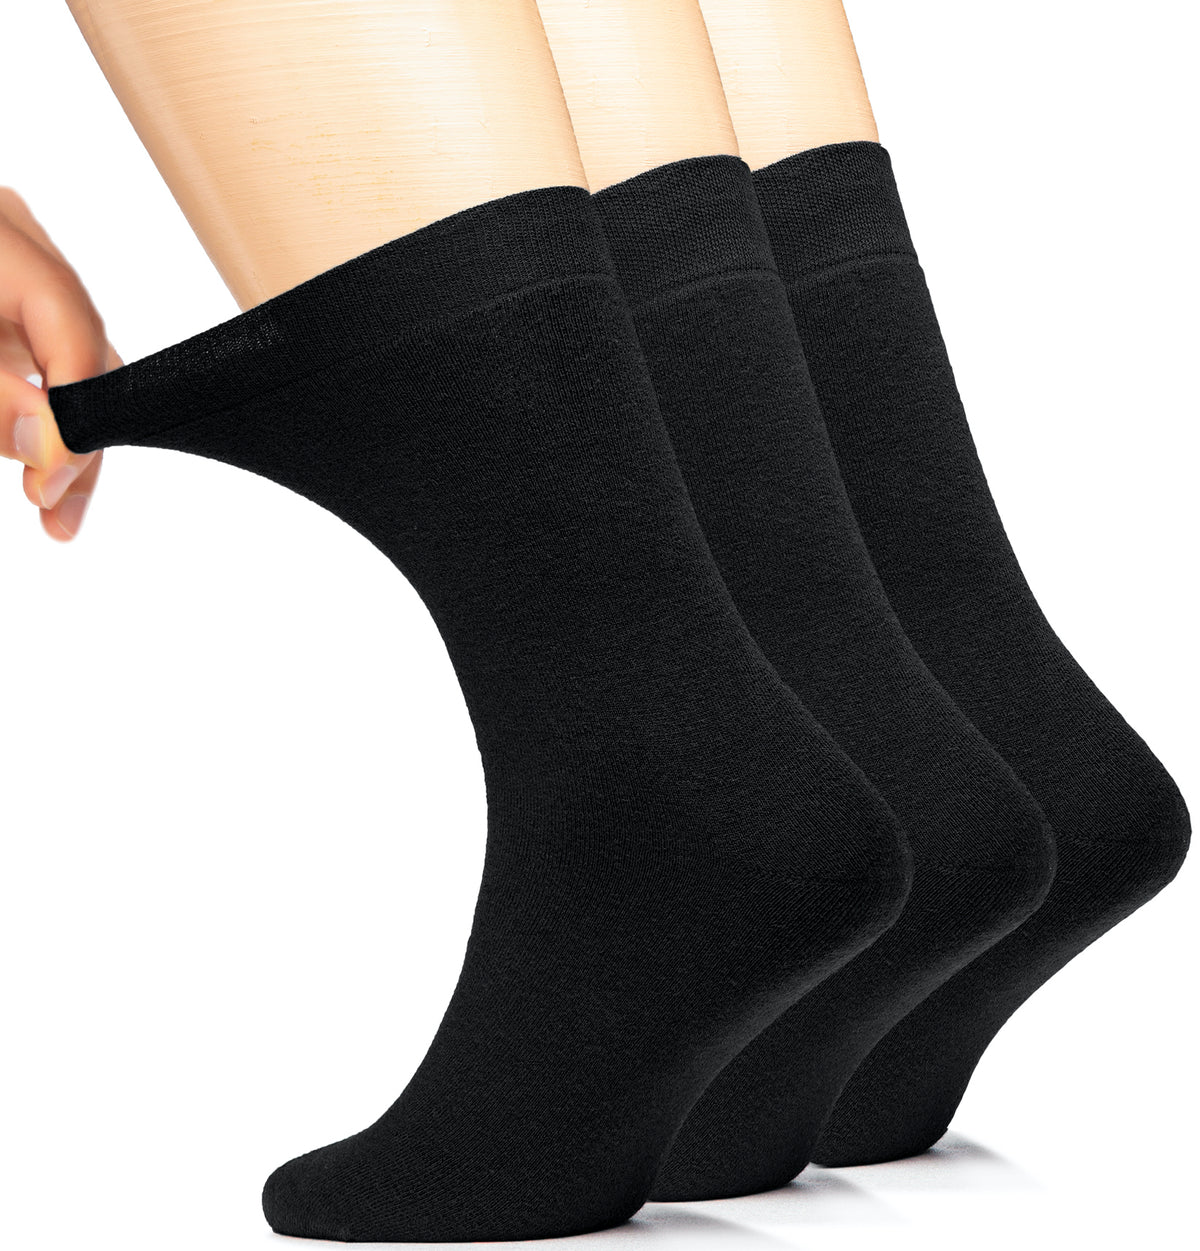 he image depicts a man's foot clad in three pairs of black Men's Cotton Full Cushion Ankle Socks, a perfect blend of comfort and elegance.